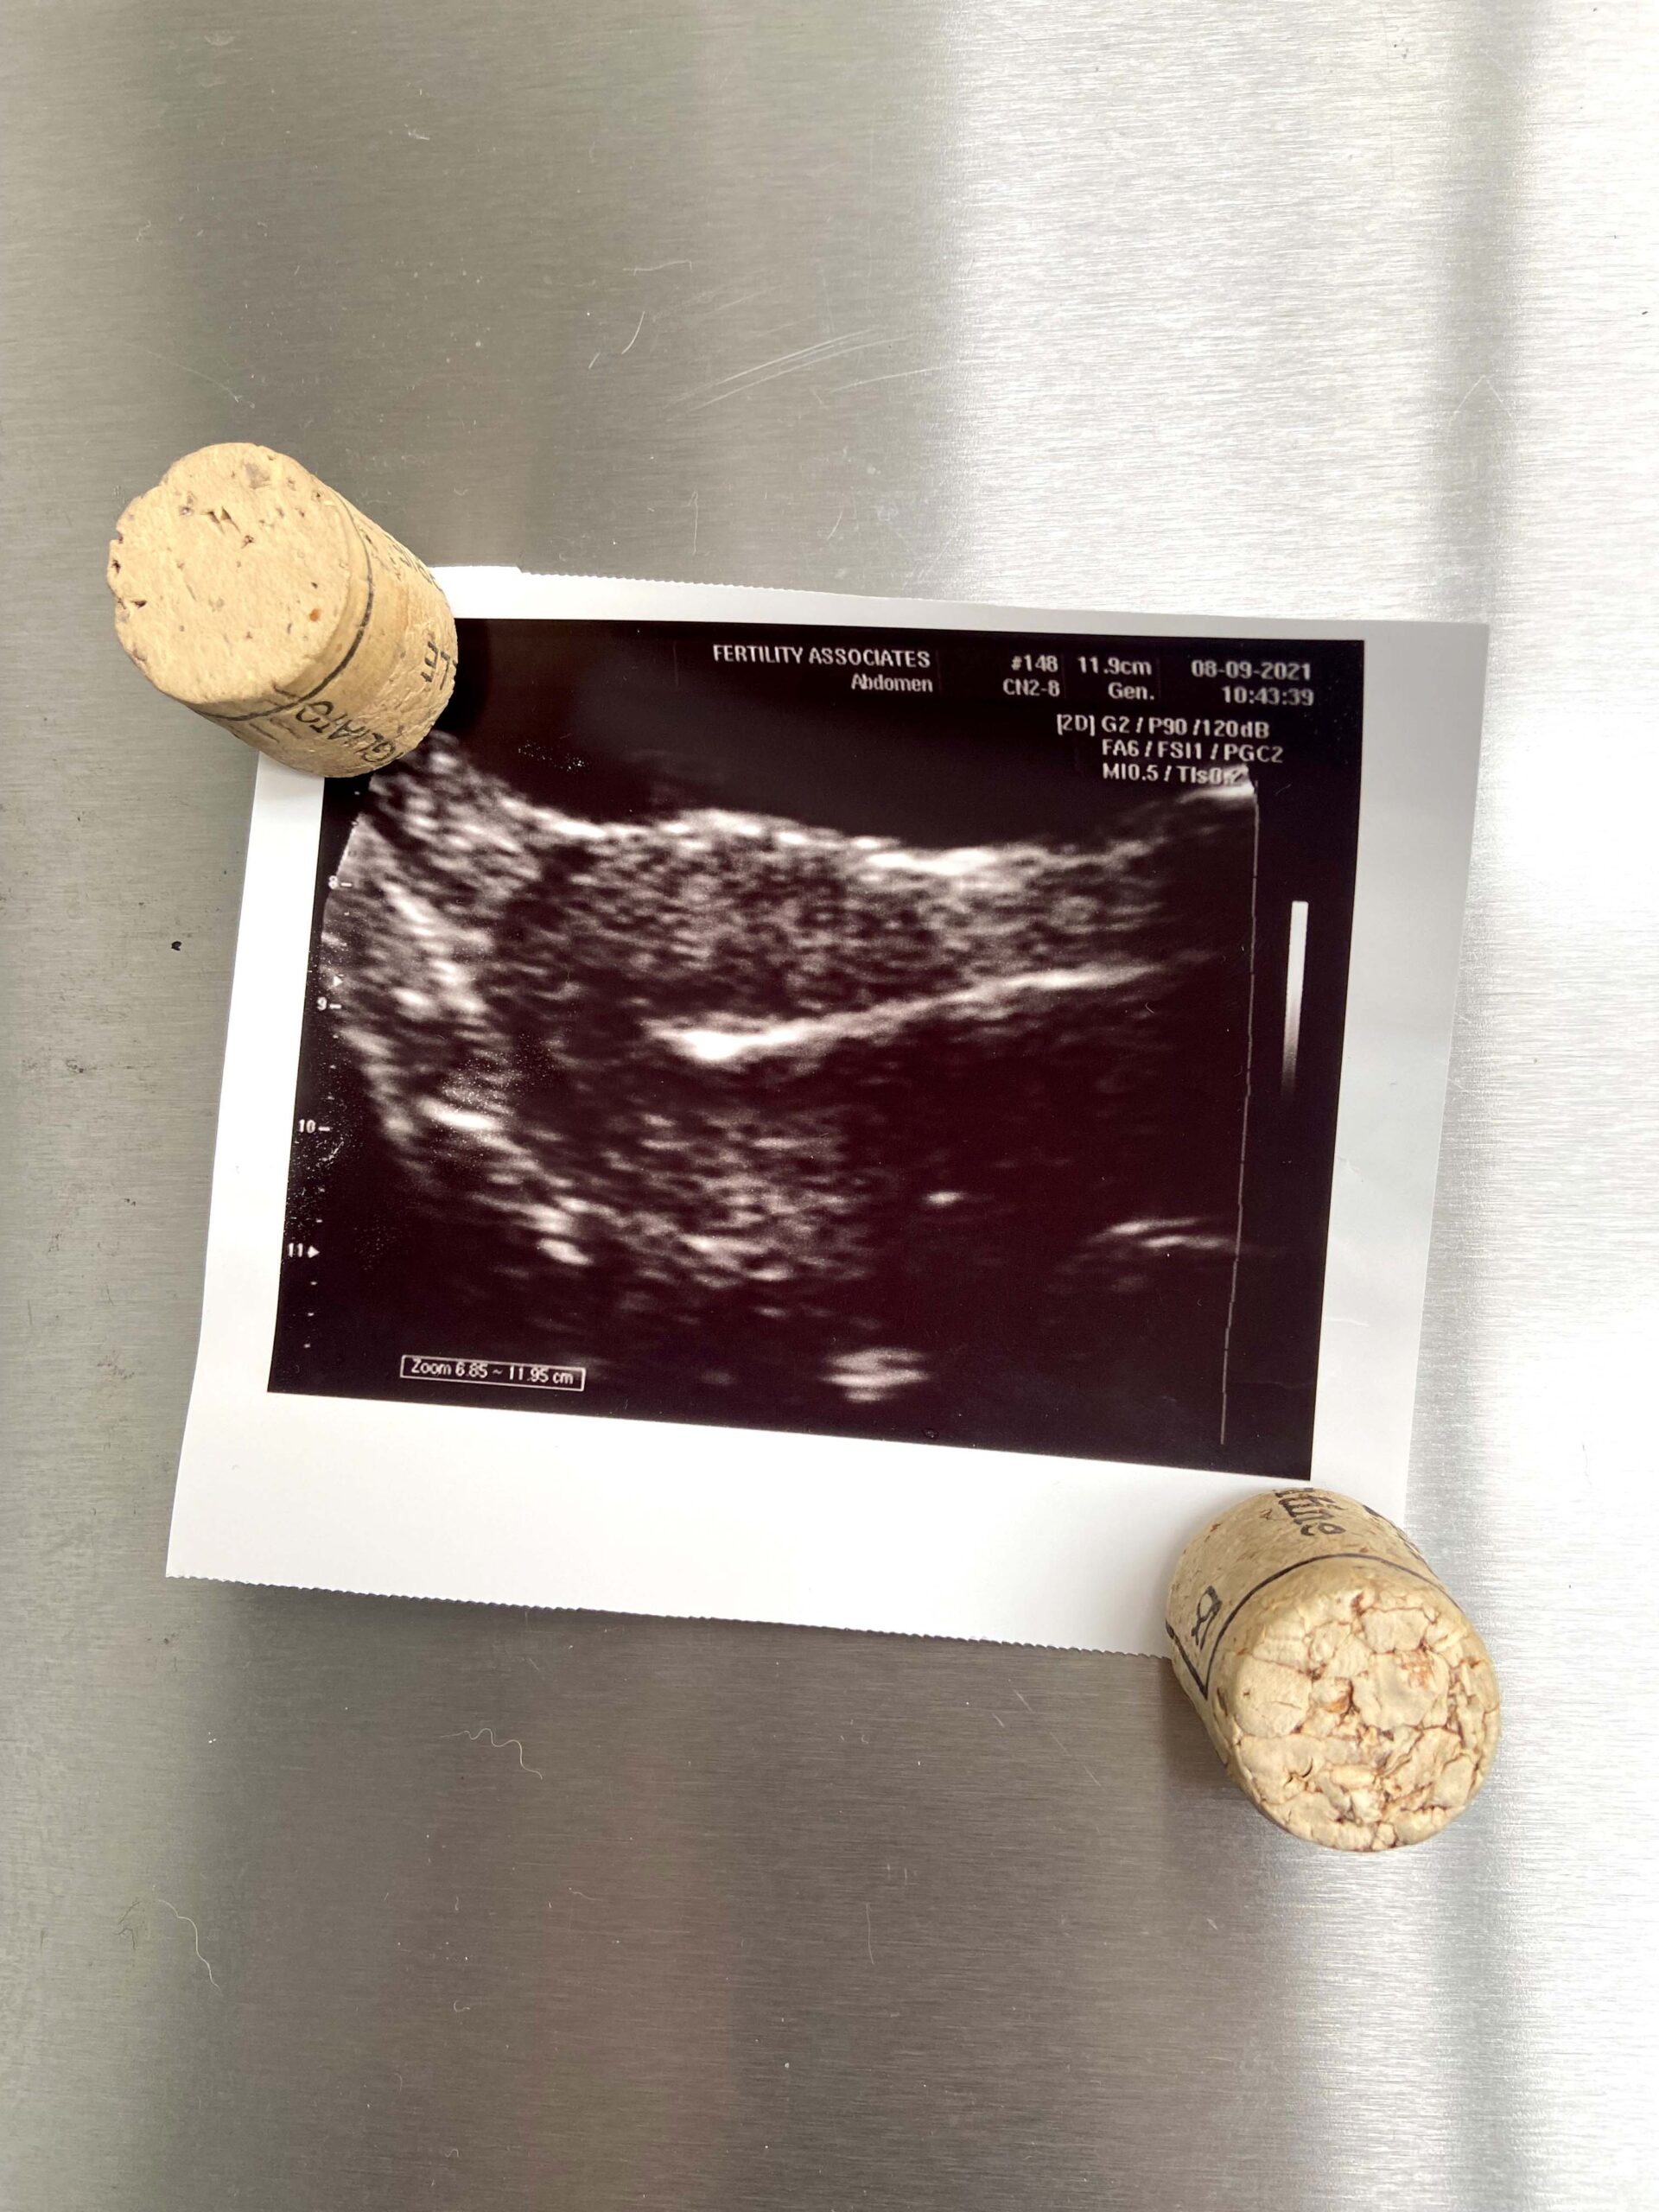 A Polaroid of a scan of a uterus pinned to a fridge